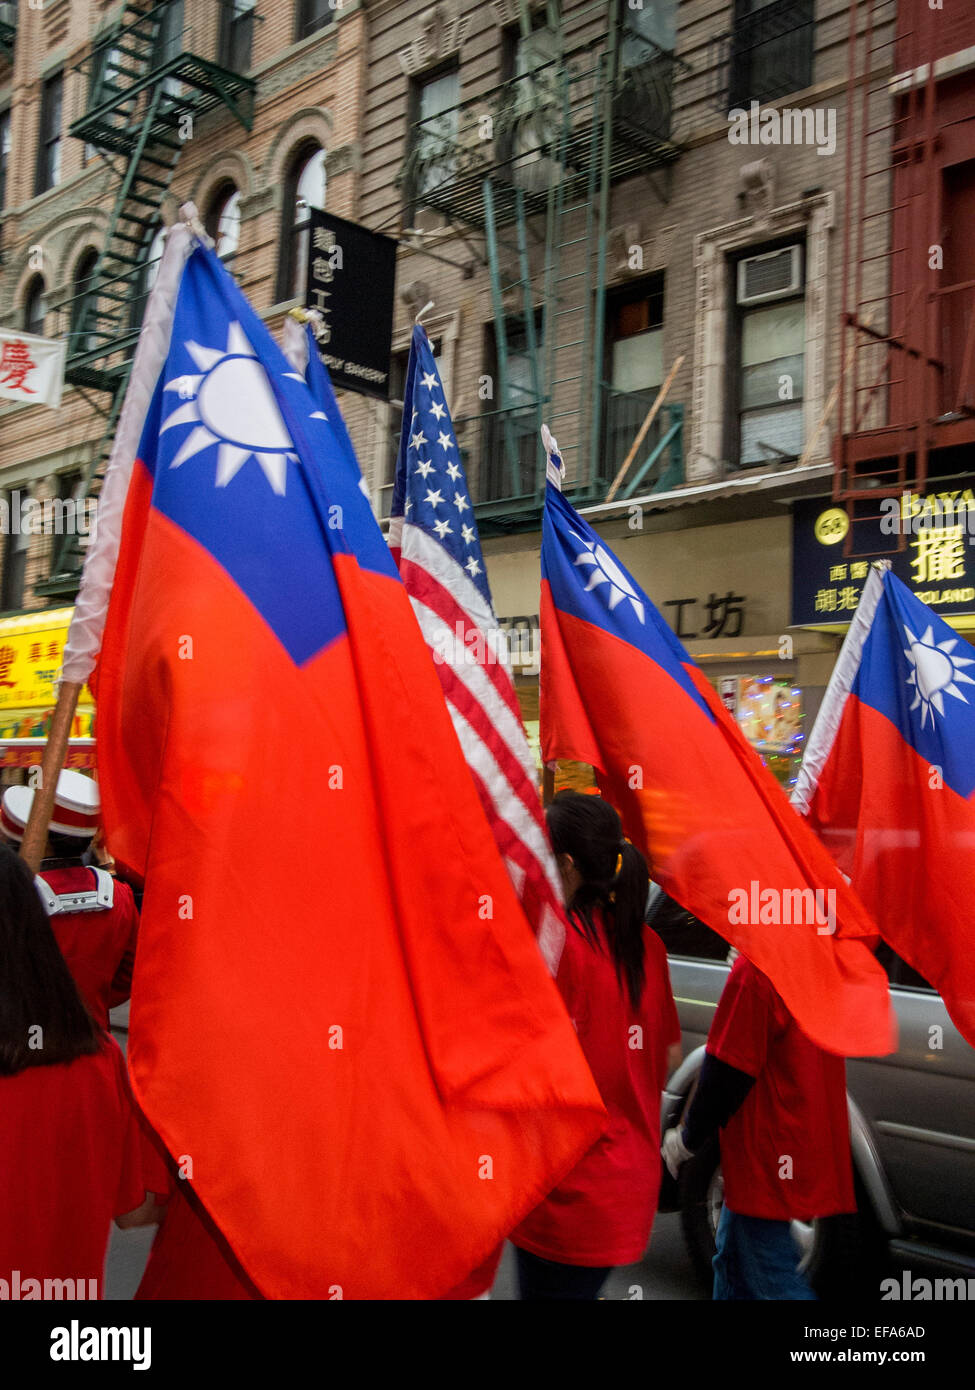 A parade on Bayard Street in New York City's Chinatown celebrates the Kuomontang or Chinese People's Party which rules the island of Taiwan. Note American and Nationalist Chinese flags. Stock Photo